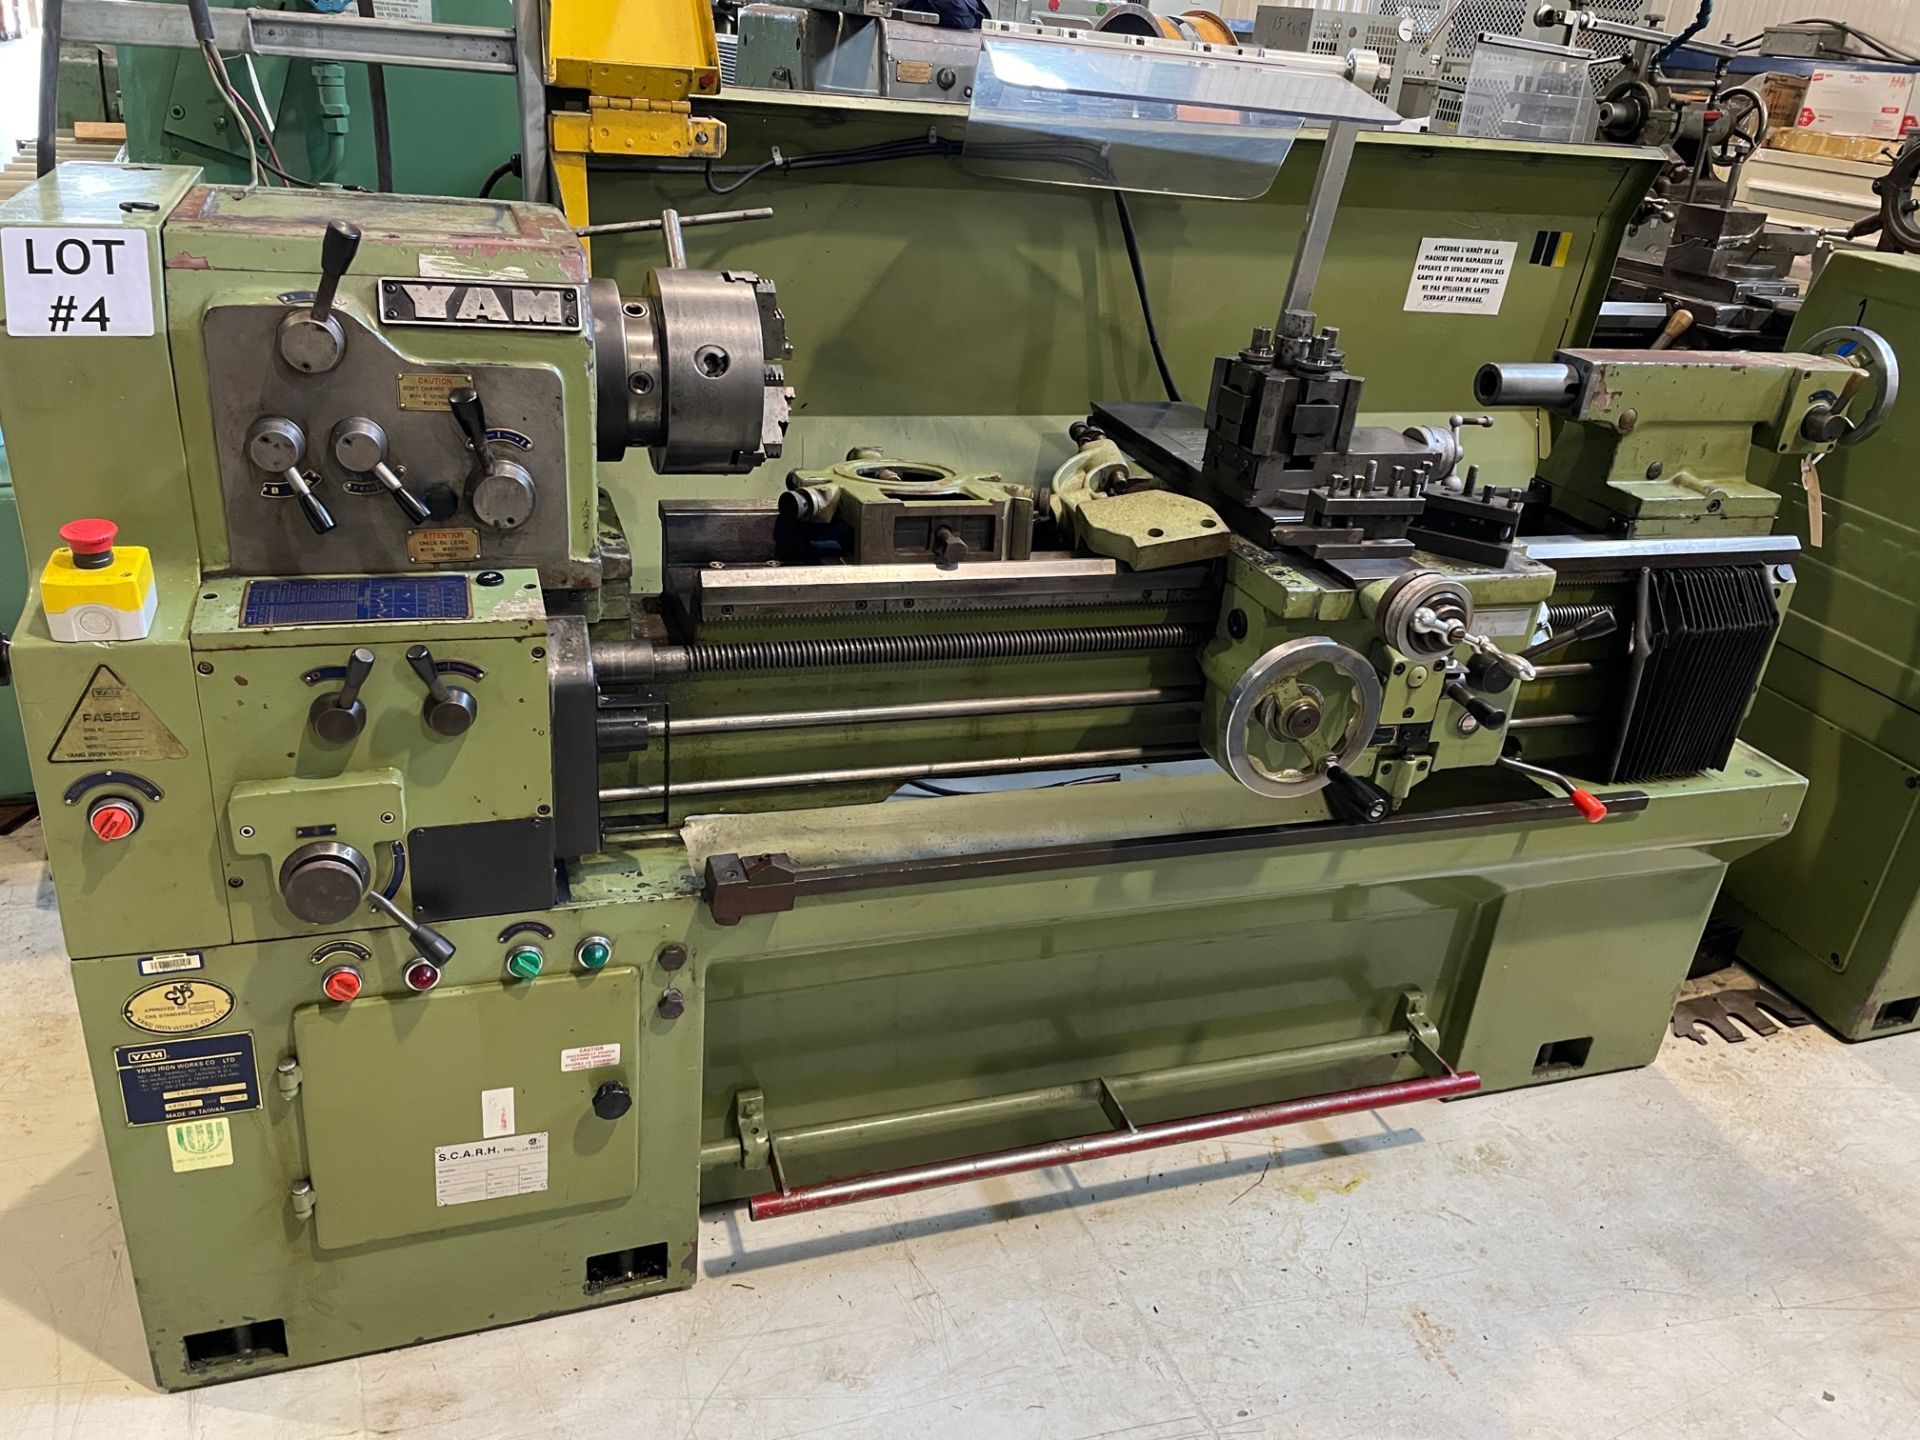 YAM LATHE, MODEL 1000G, A97813, 14'' X 40'', LOCATION, MONTREAL, QUEBEC